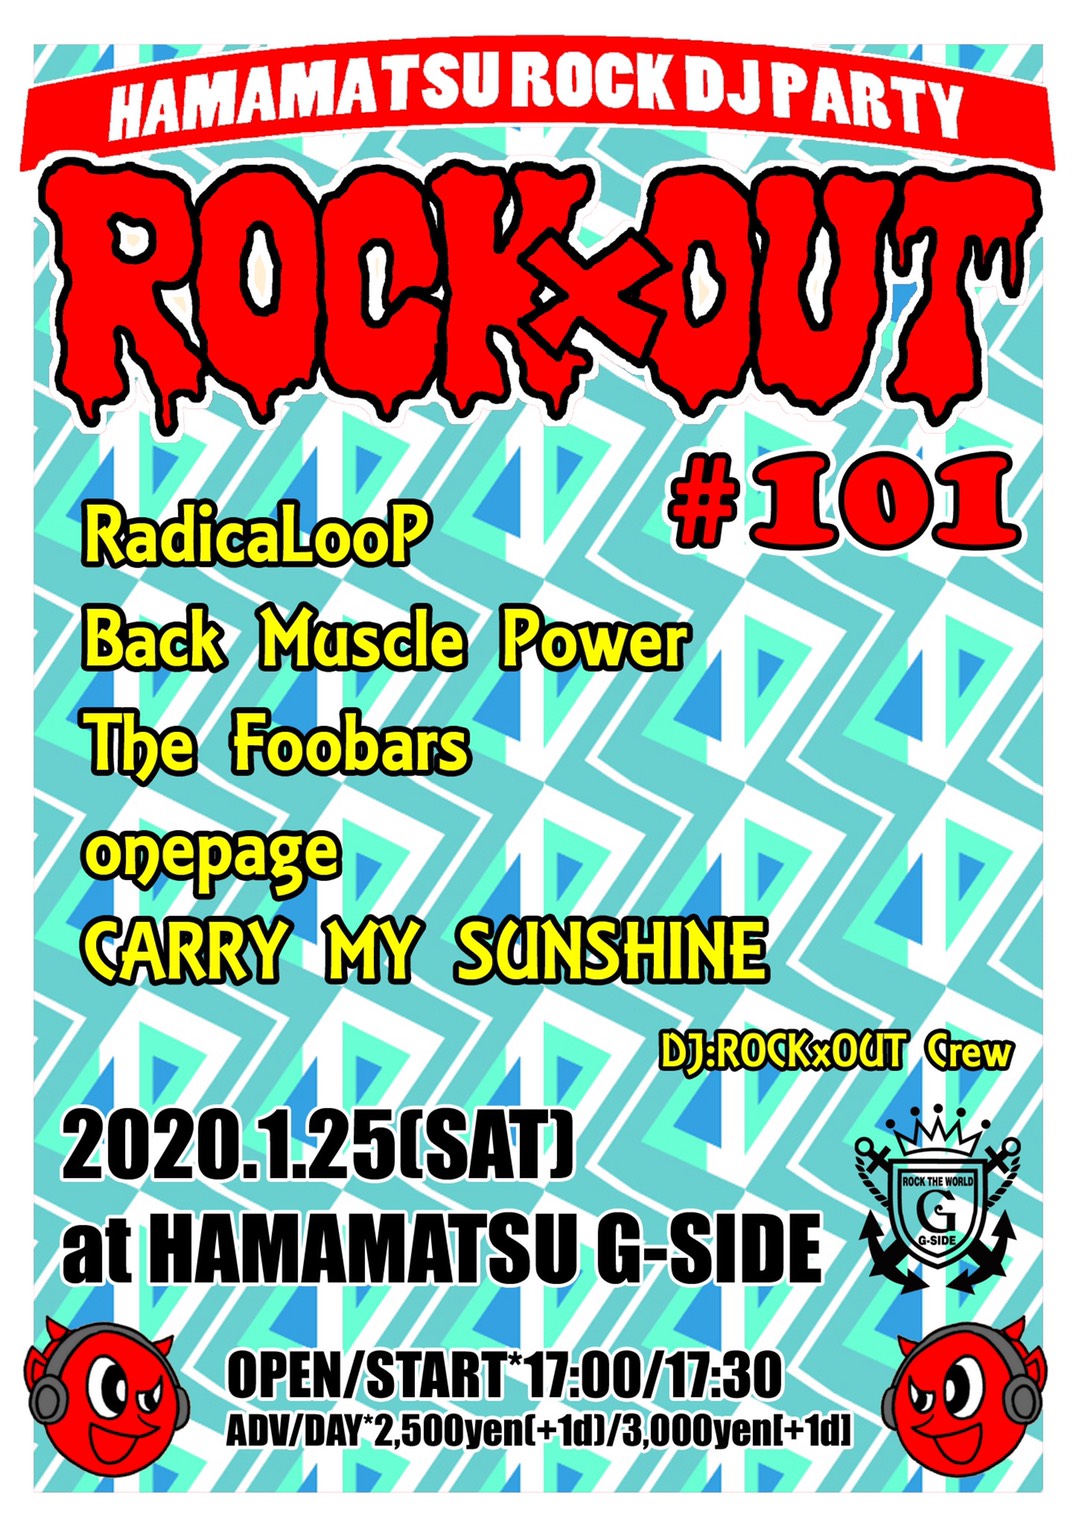 ROCK×OUT #101